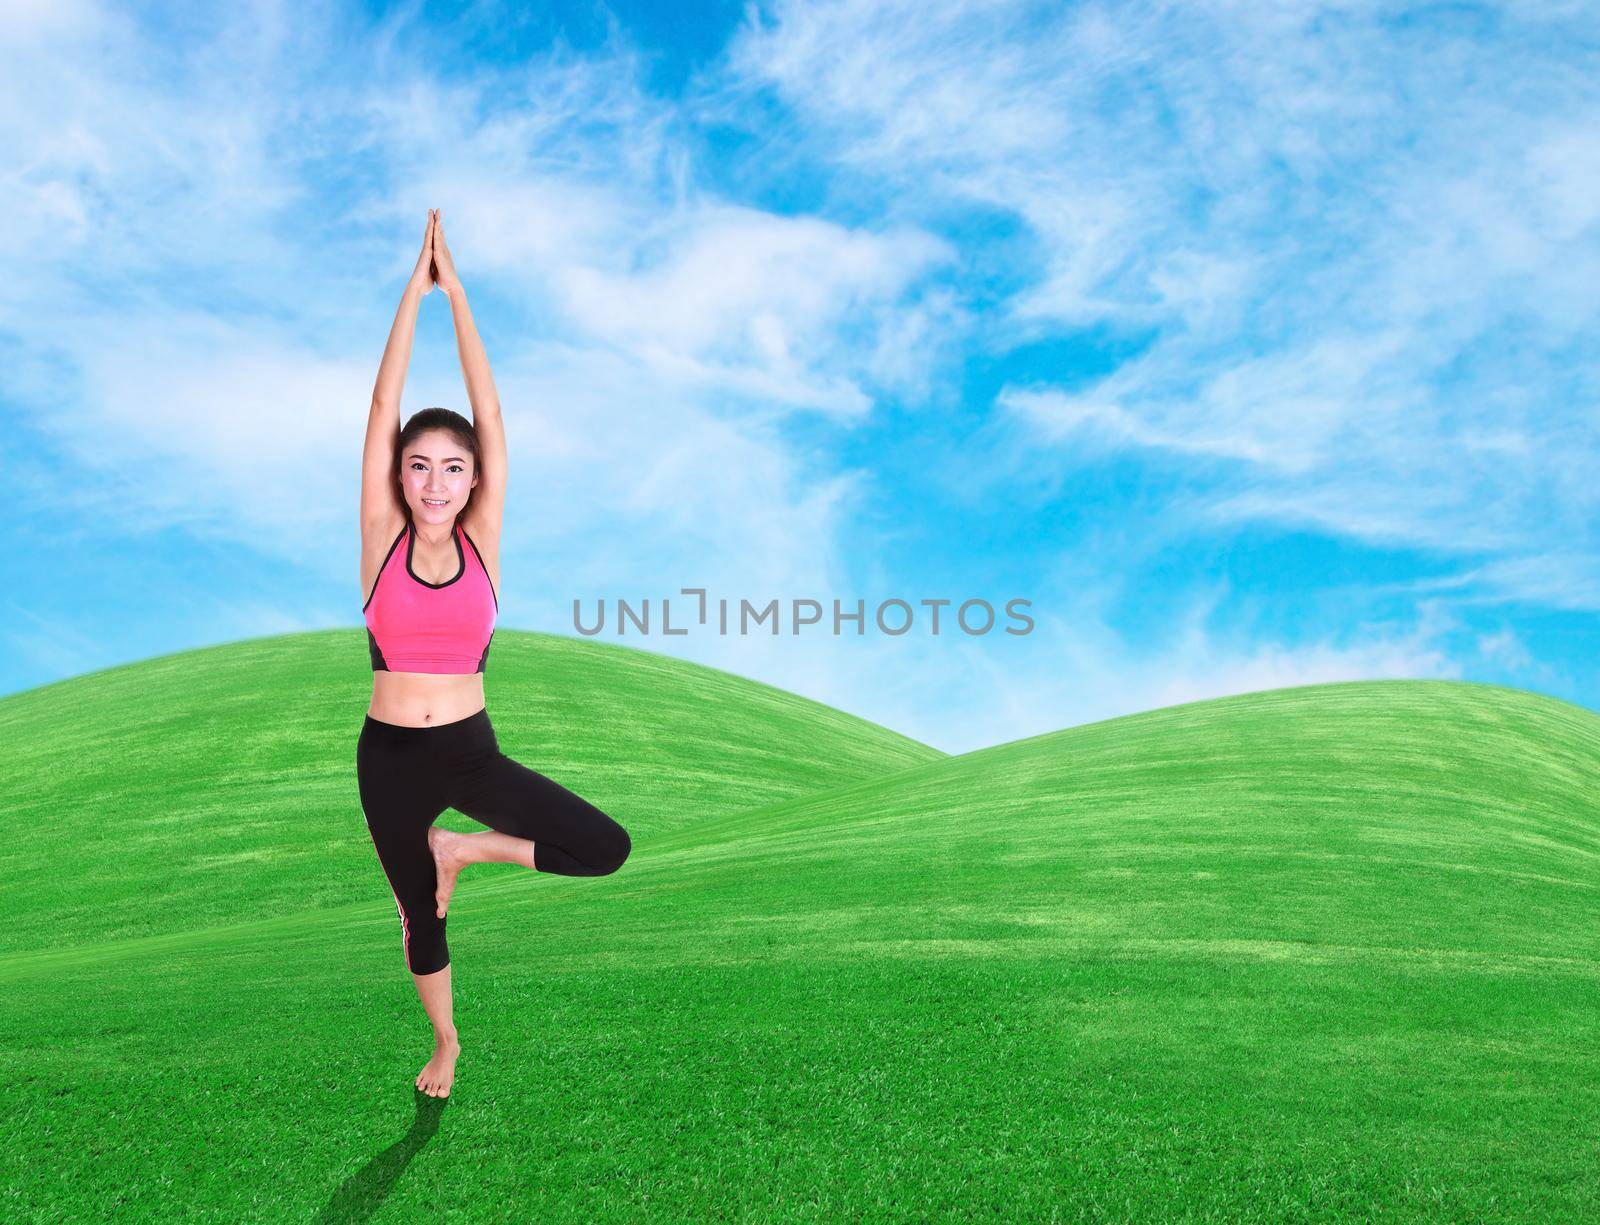 Young woman doing yoga exercise on grass with sky